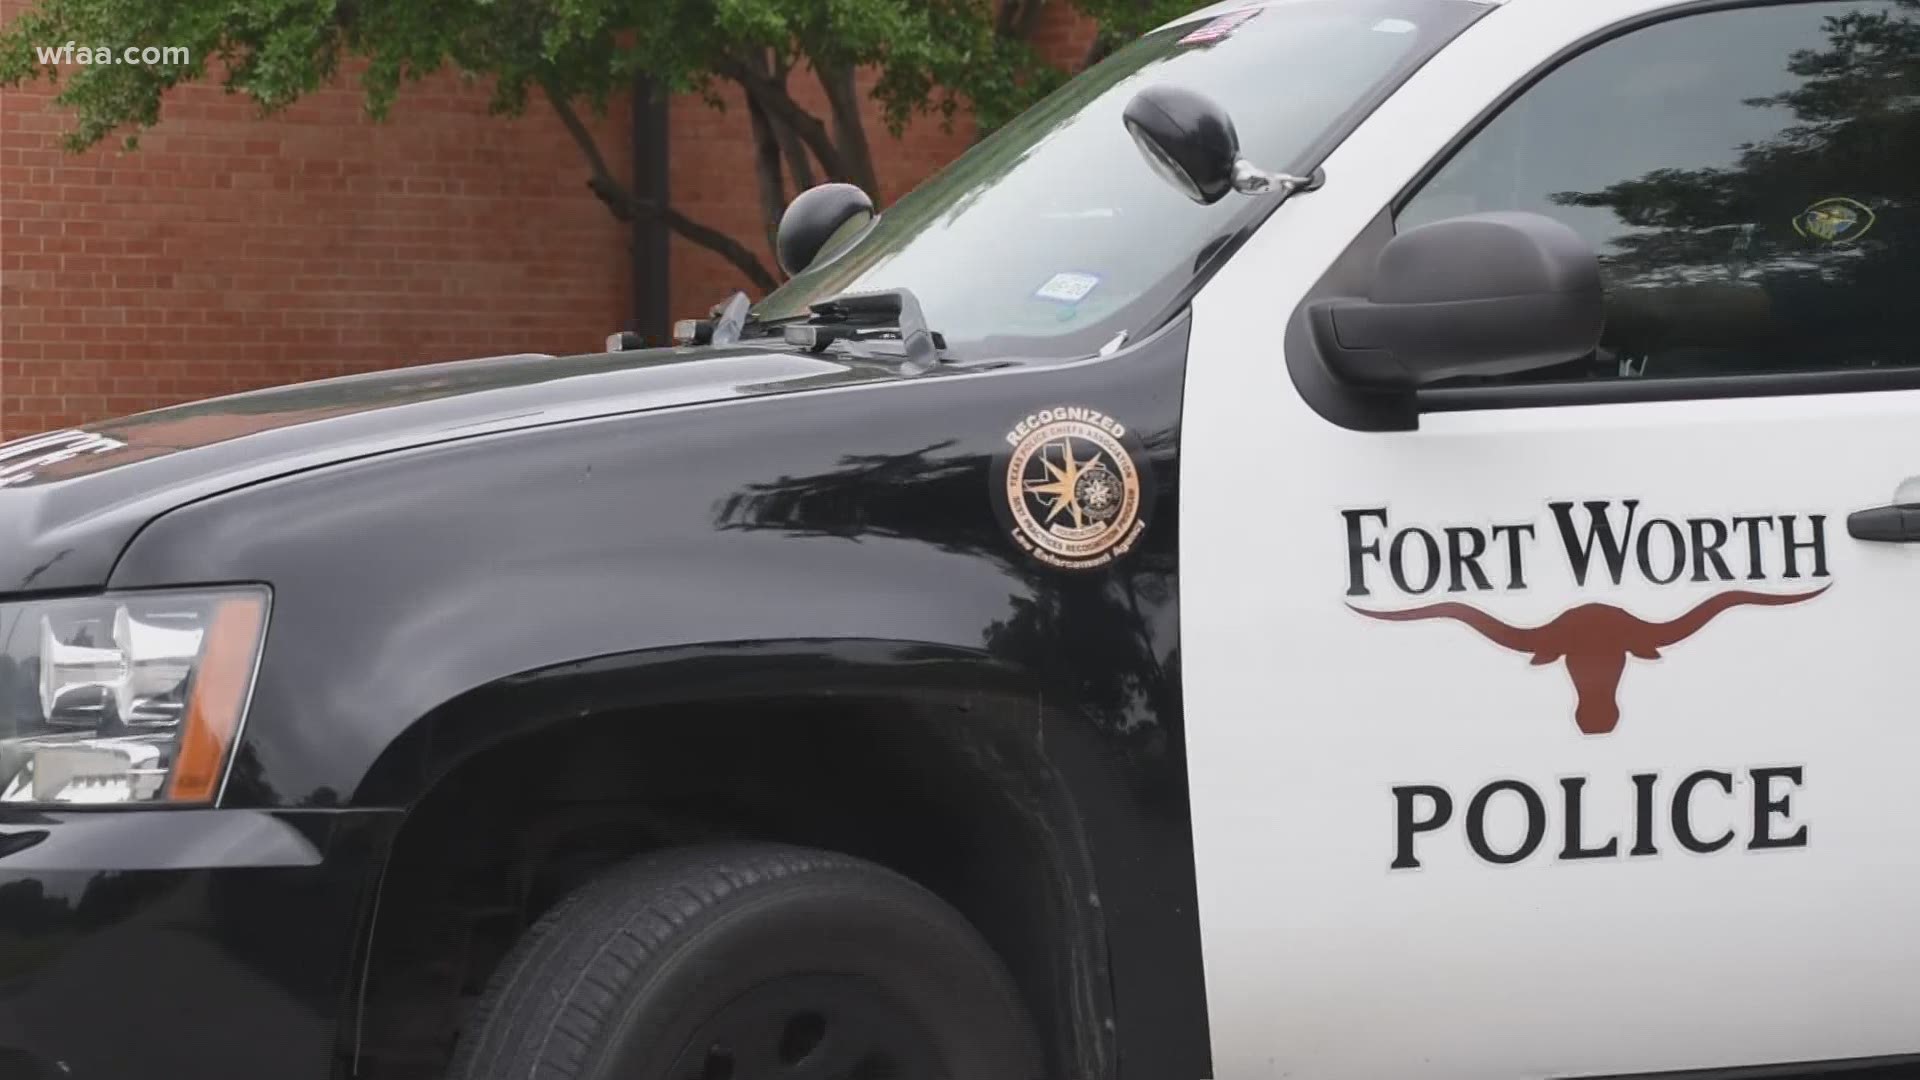 The 14-year-old girl's death marks the 111th homicide of the year in Fort Worth, a rate that has almost doubled since 2018.